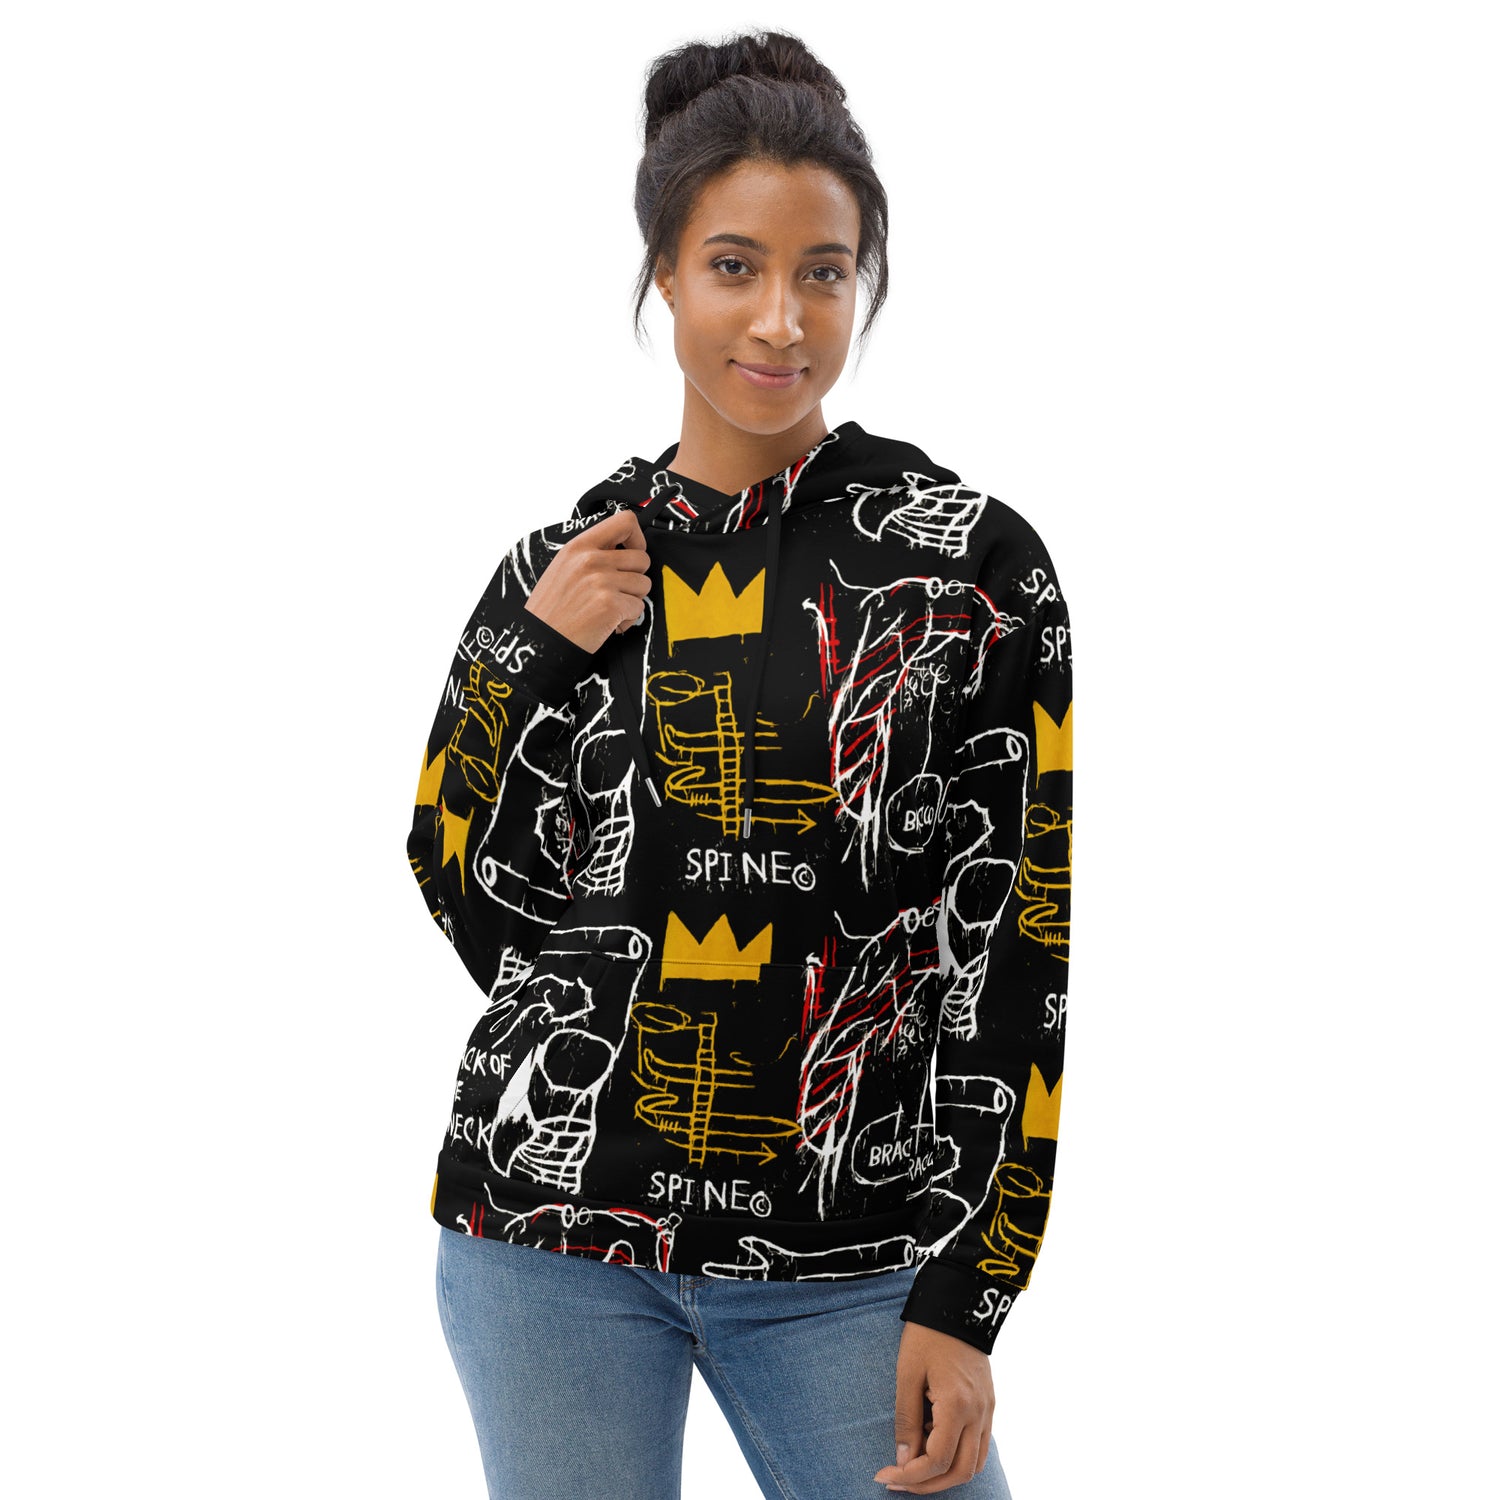 Jean-Michel Basquiat "Back of the Neck" Artwork All Over Printed Black and Yellow Sweatshirt Hoodie Scattered Streetwear